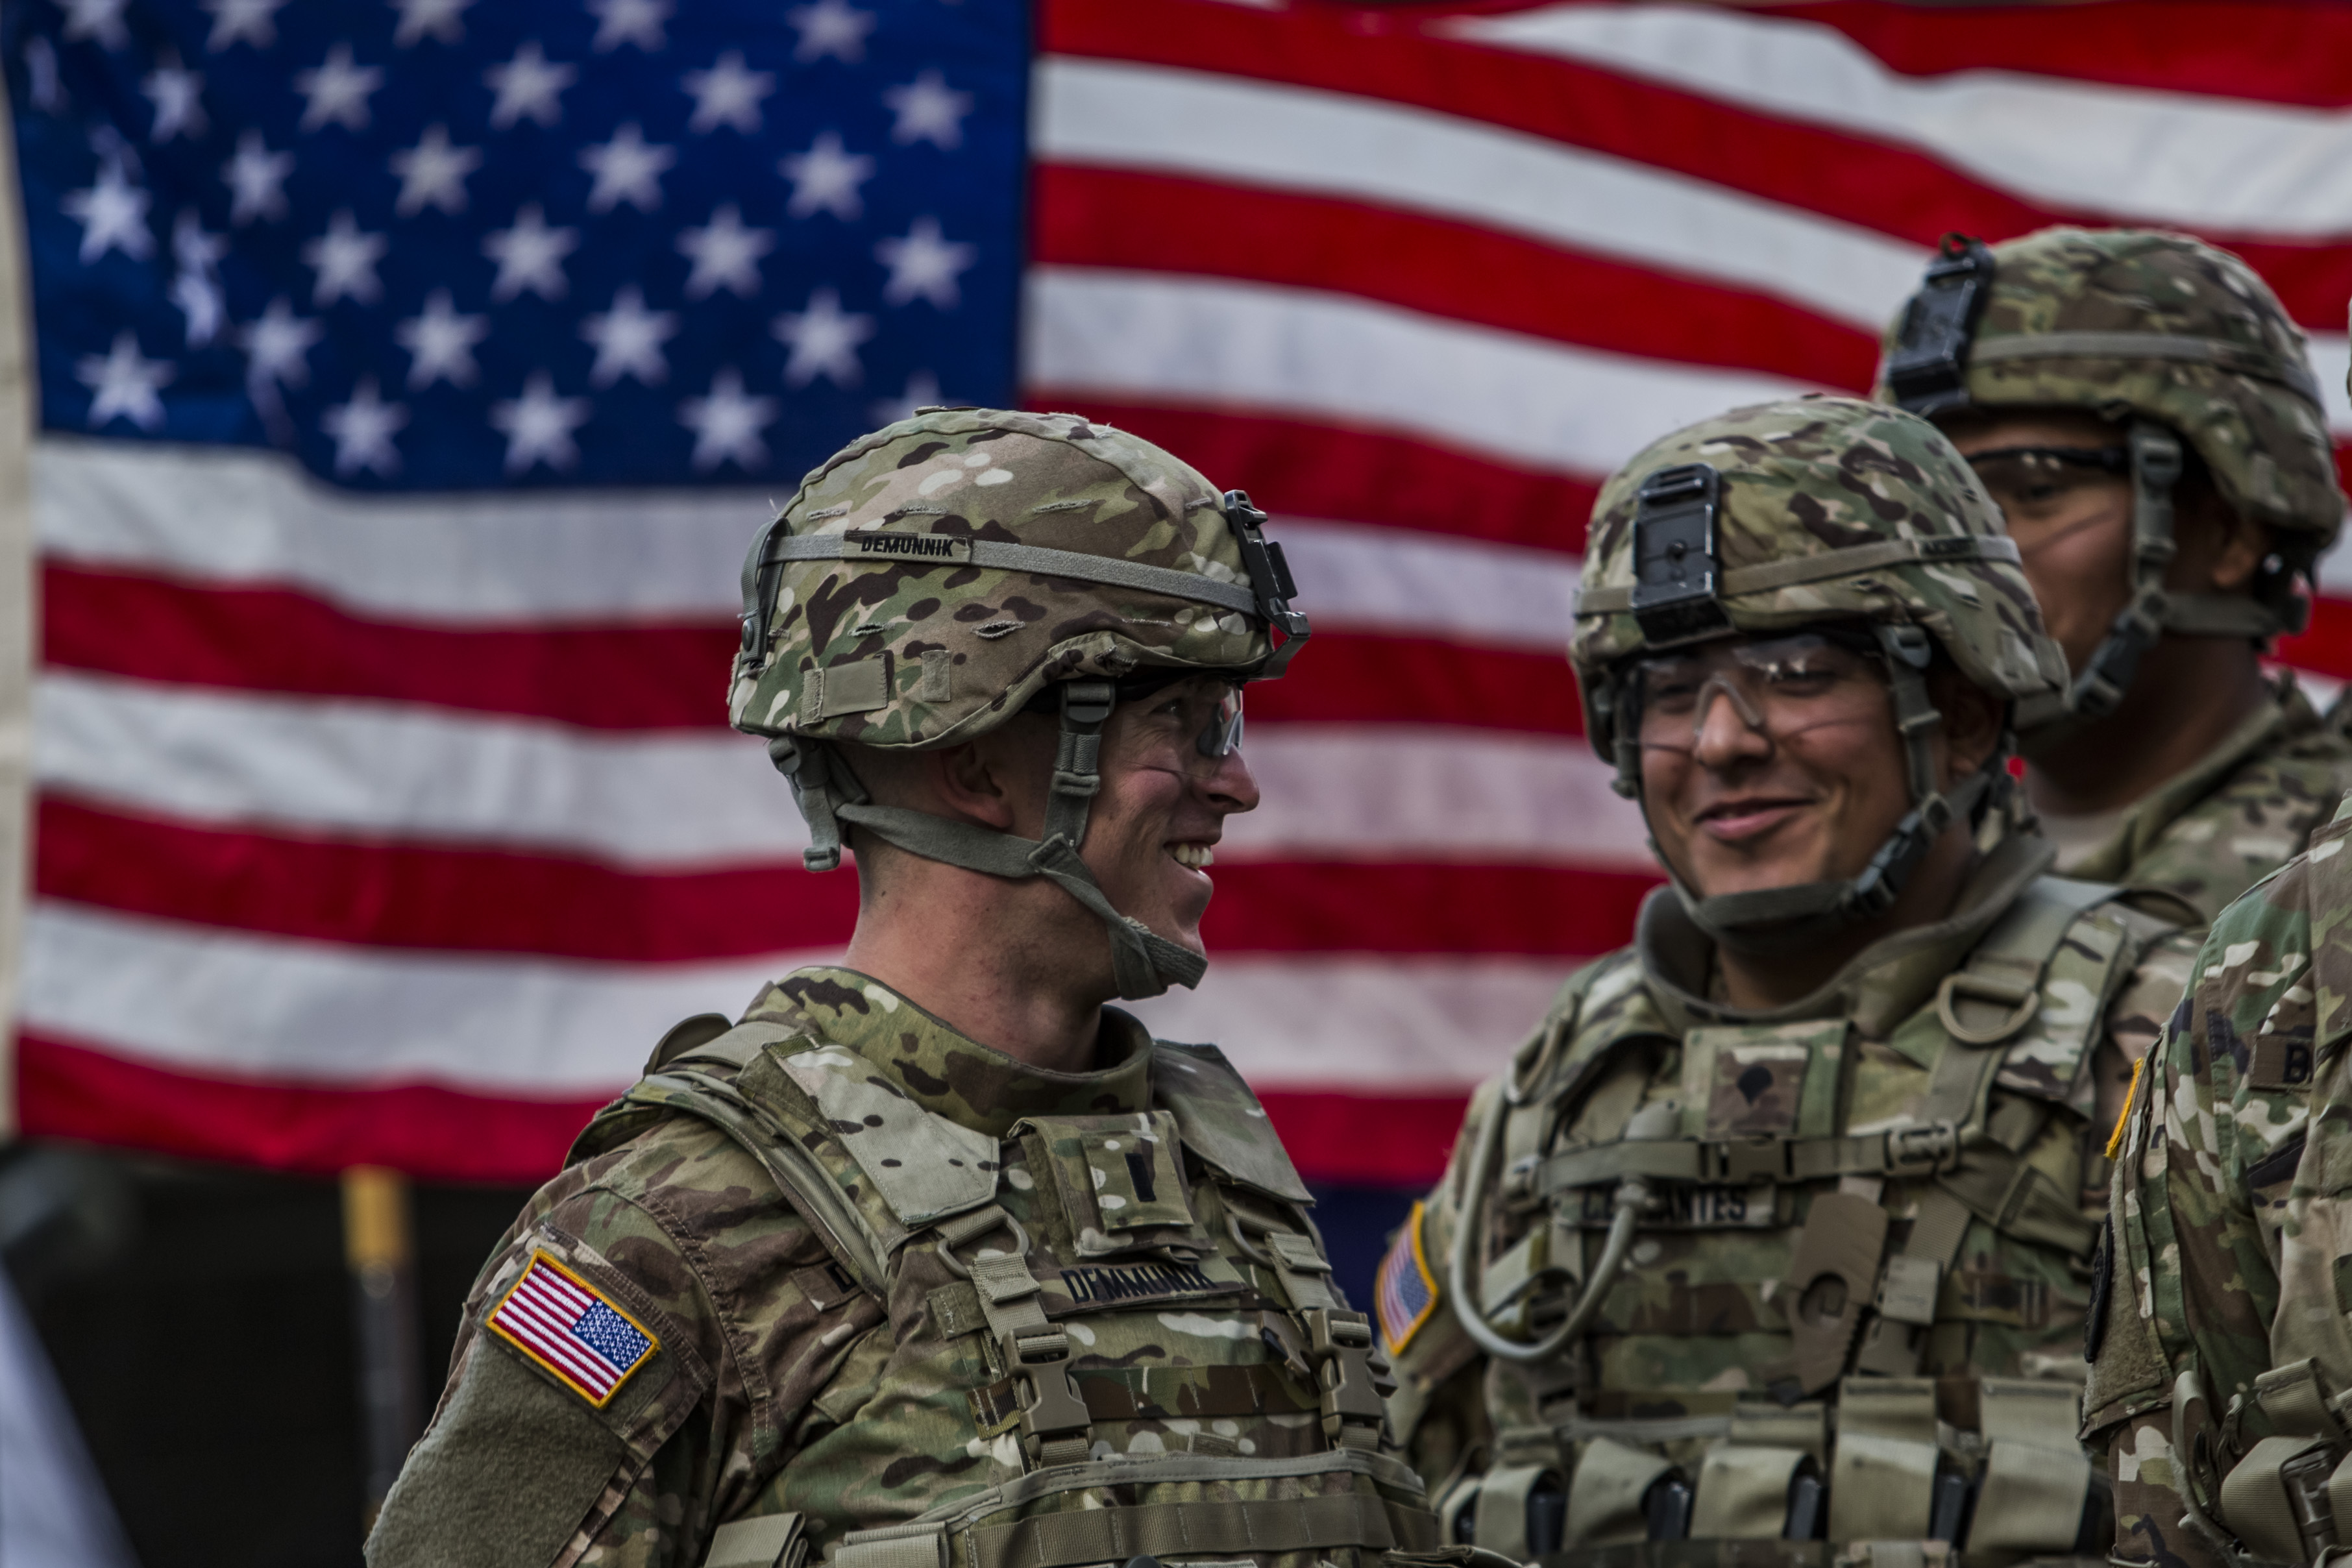 U.S. soldiers from the 2nd Cavalry Regiment  before arrival of NATO Secretary General Jens Stoltenberg at the Czech army barracks on September 9, 2015 in Prague, Czech Republic. U.S. soldiers were traveling in the 'Danube Ride' convoy from their home base in Vilseck, Bavaria, Germany to Hungary. (Matej Divizna&mdash;Getty Images)